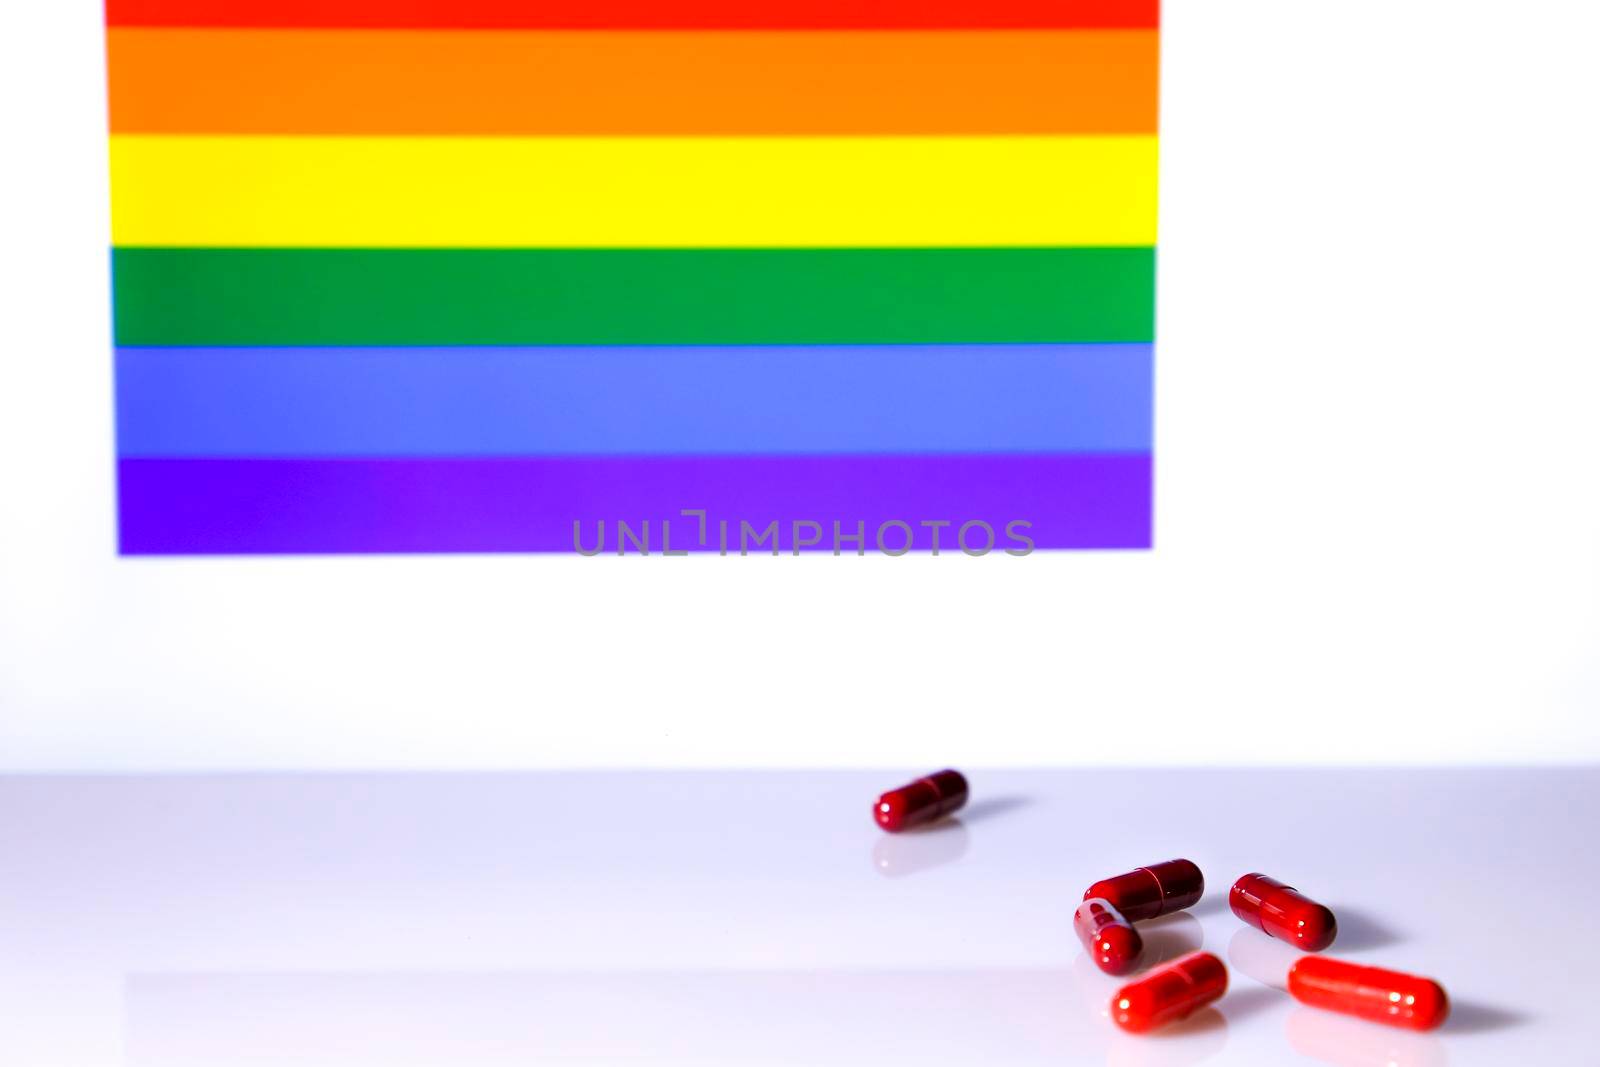 Six Red capsules and rainbow flag in the background